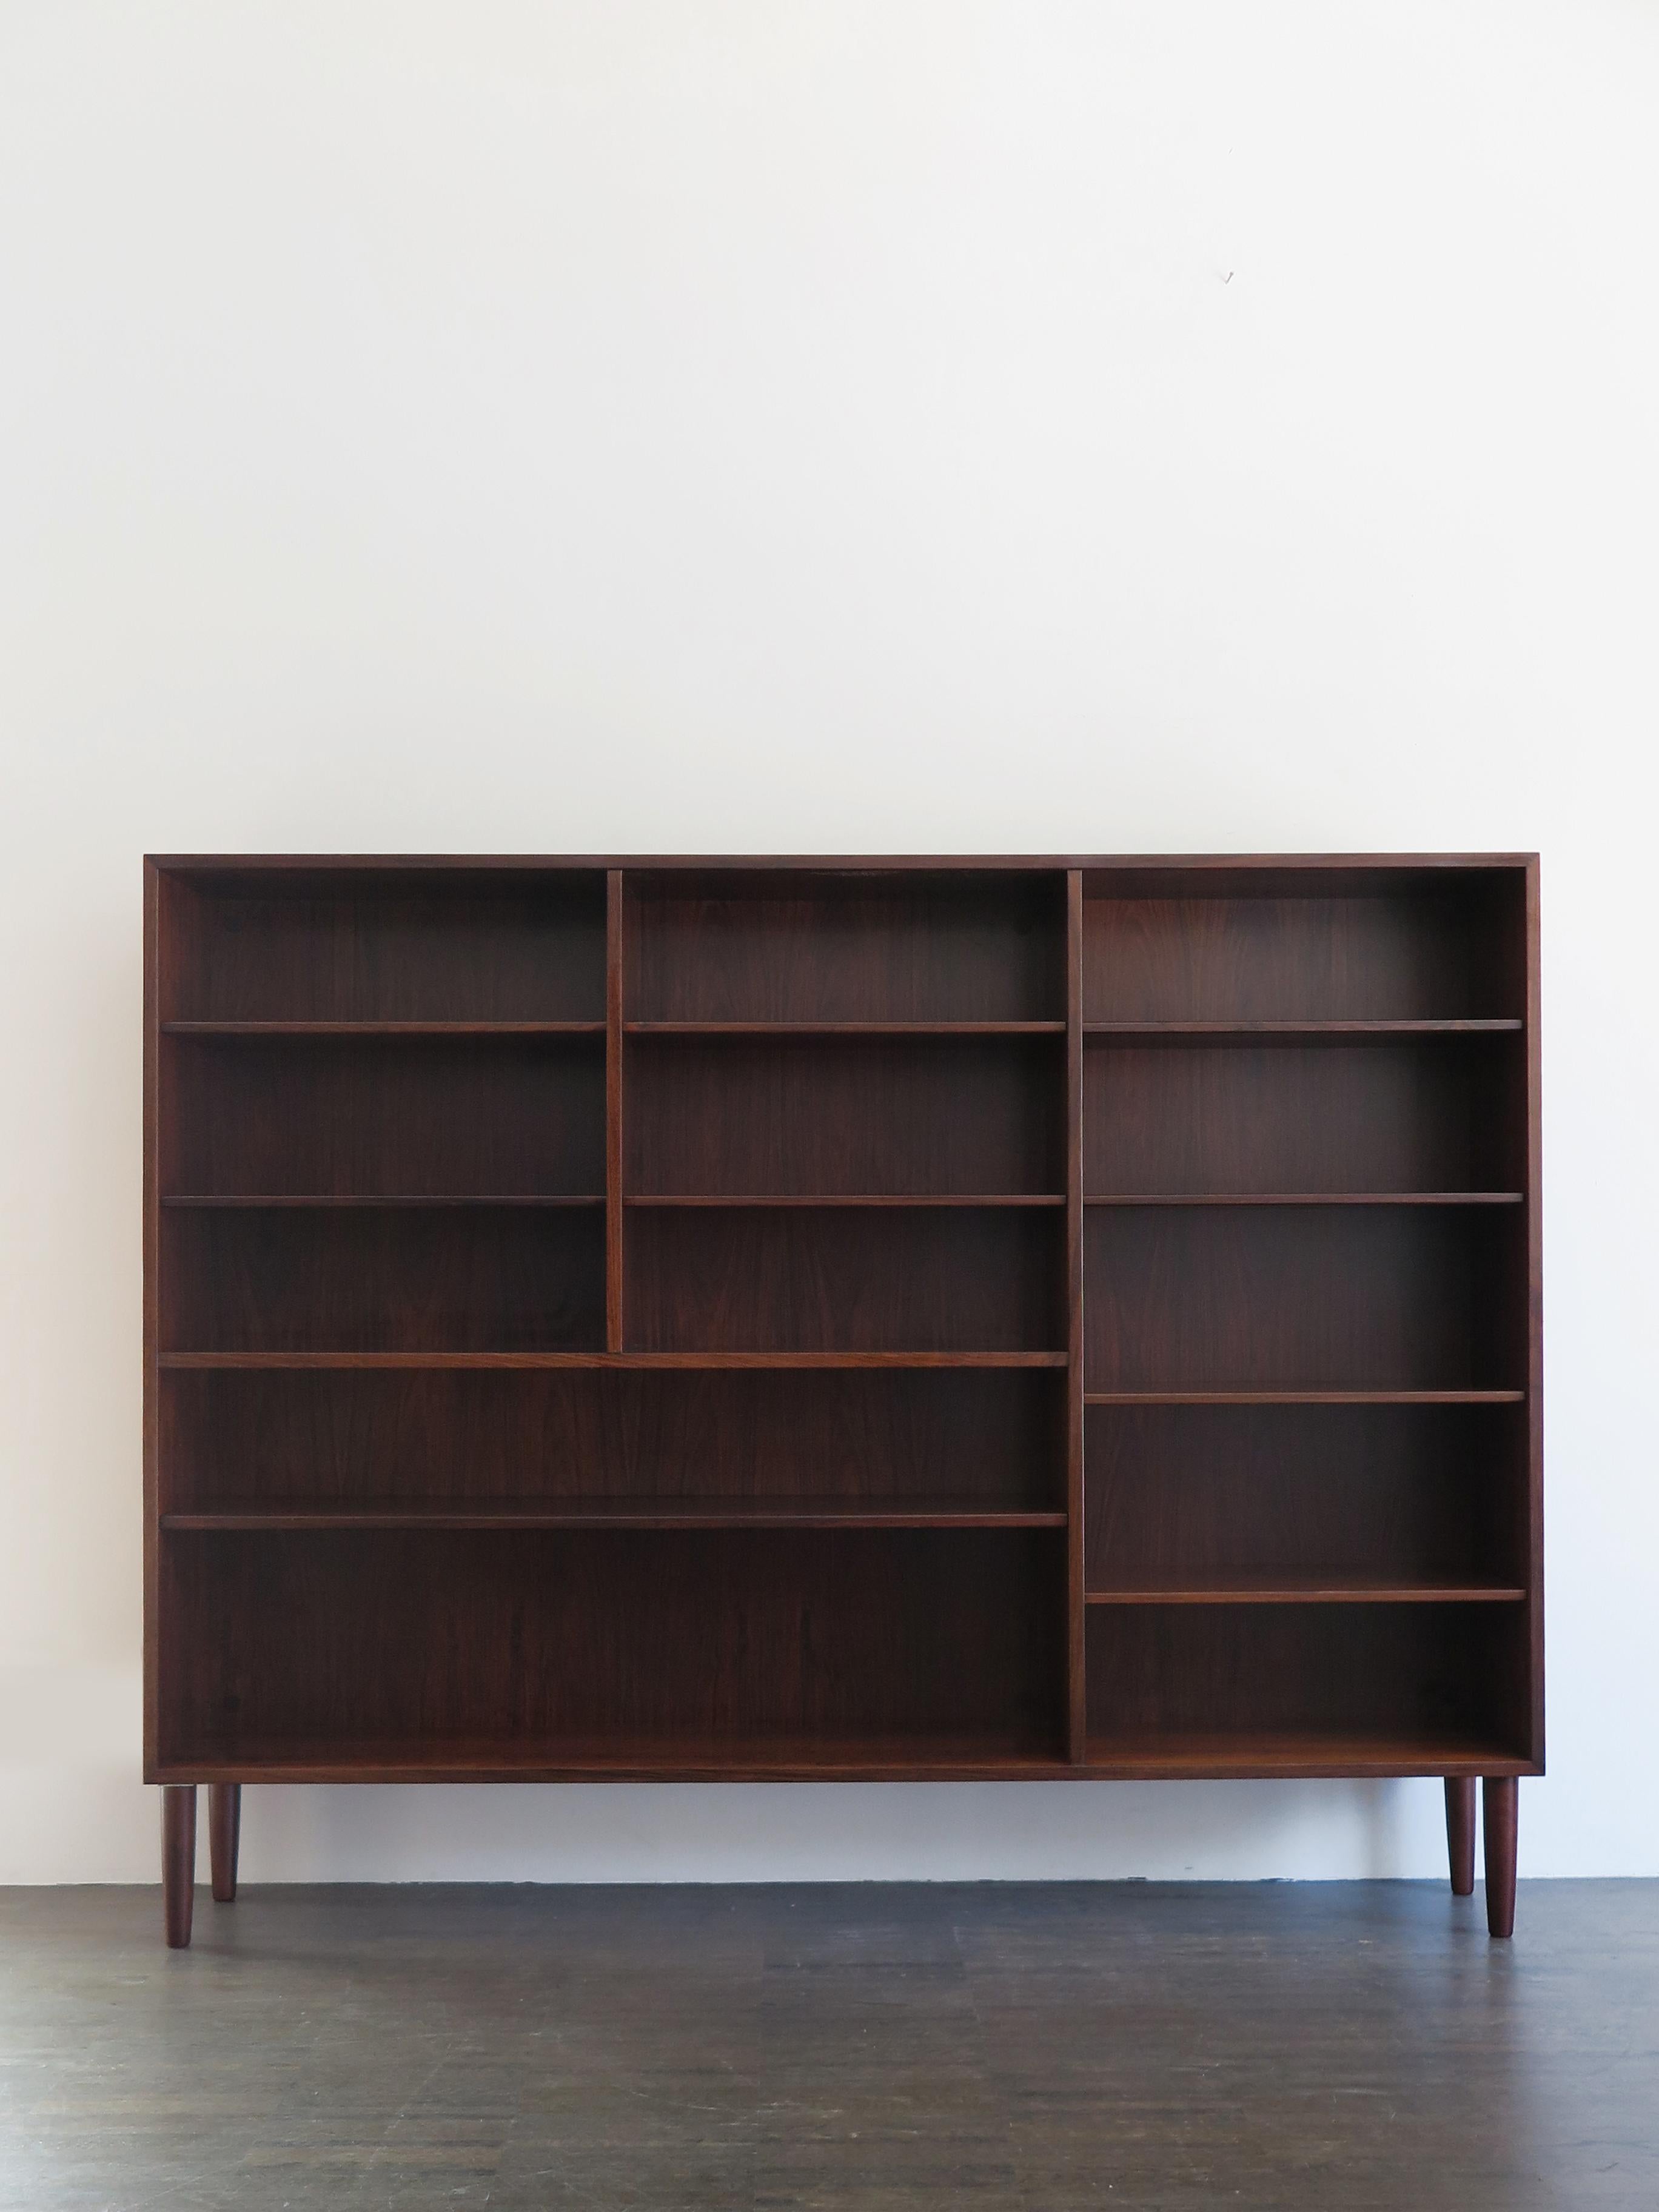 Scandinavian Mid-Century Modern design dark wood bookcase with variable height position of shelves, produced in Denmark from 1960s, unknow design.

Please note that the bookcase is original of the period and this shows normal signs of age and use.